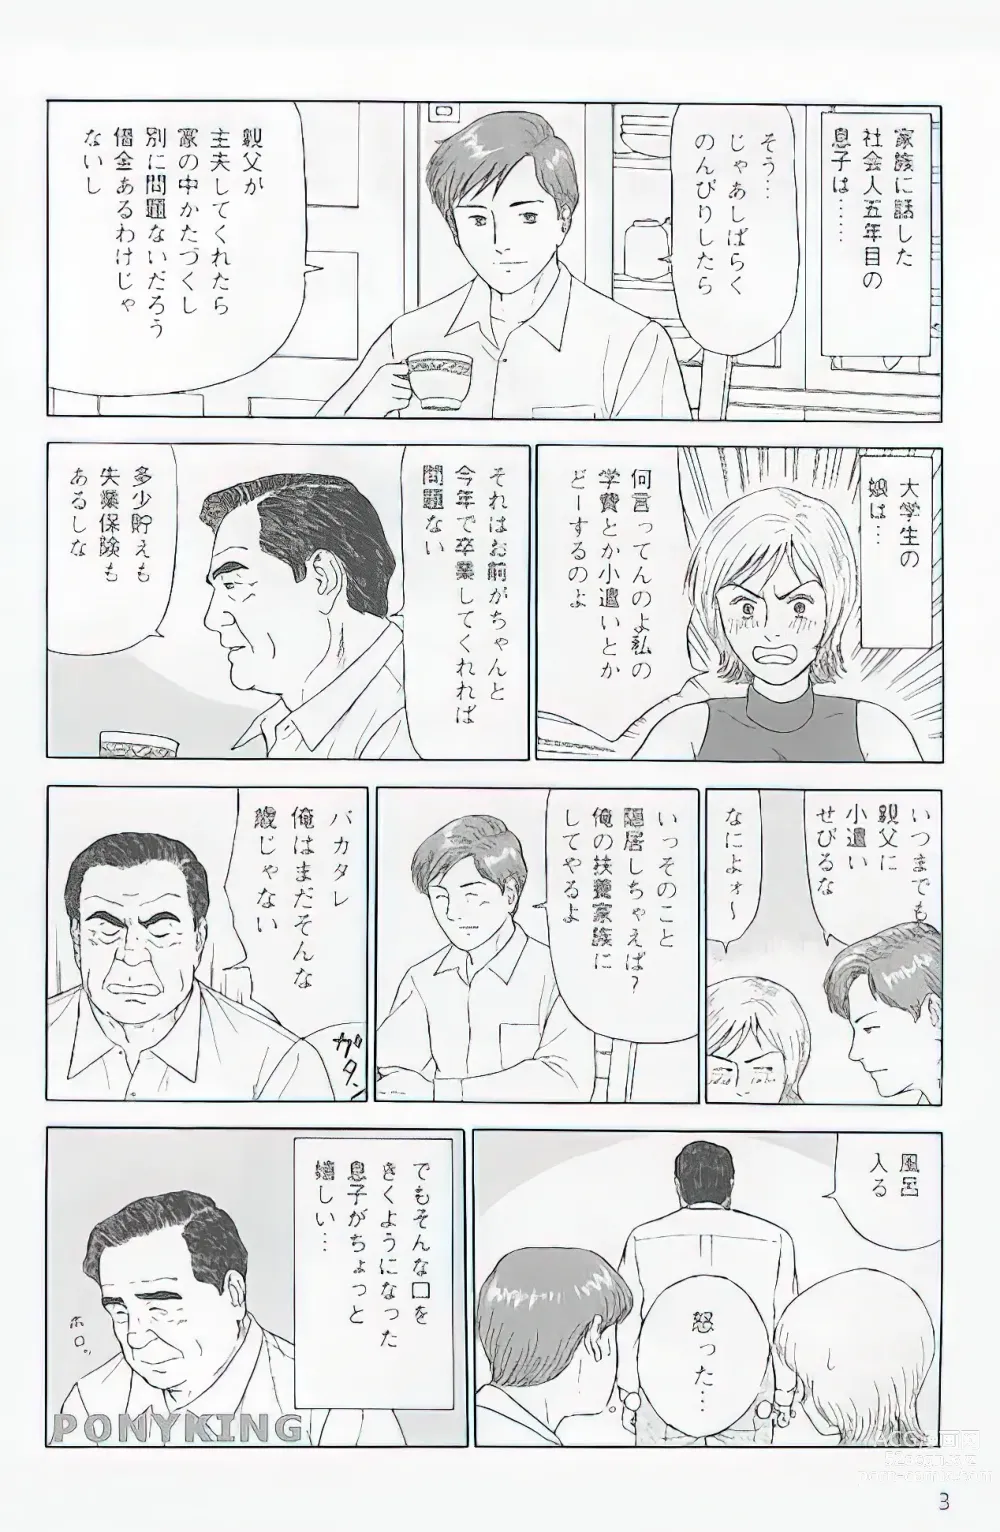 Page 3 of manga The middle-aged men comics - from Japanese magazine